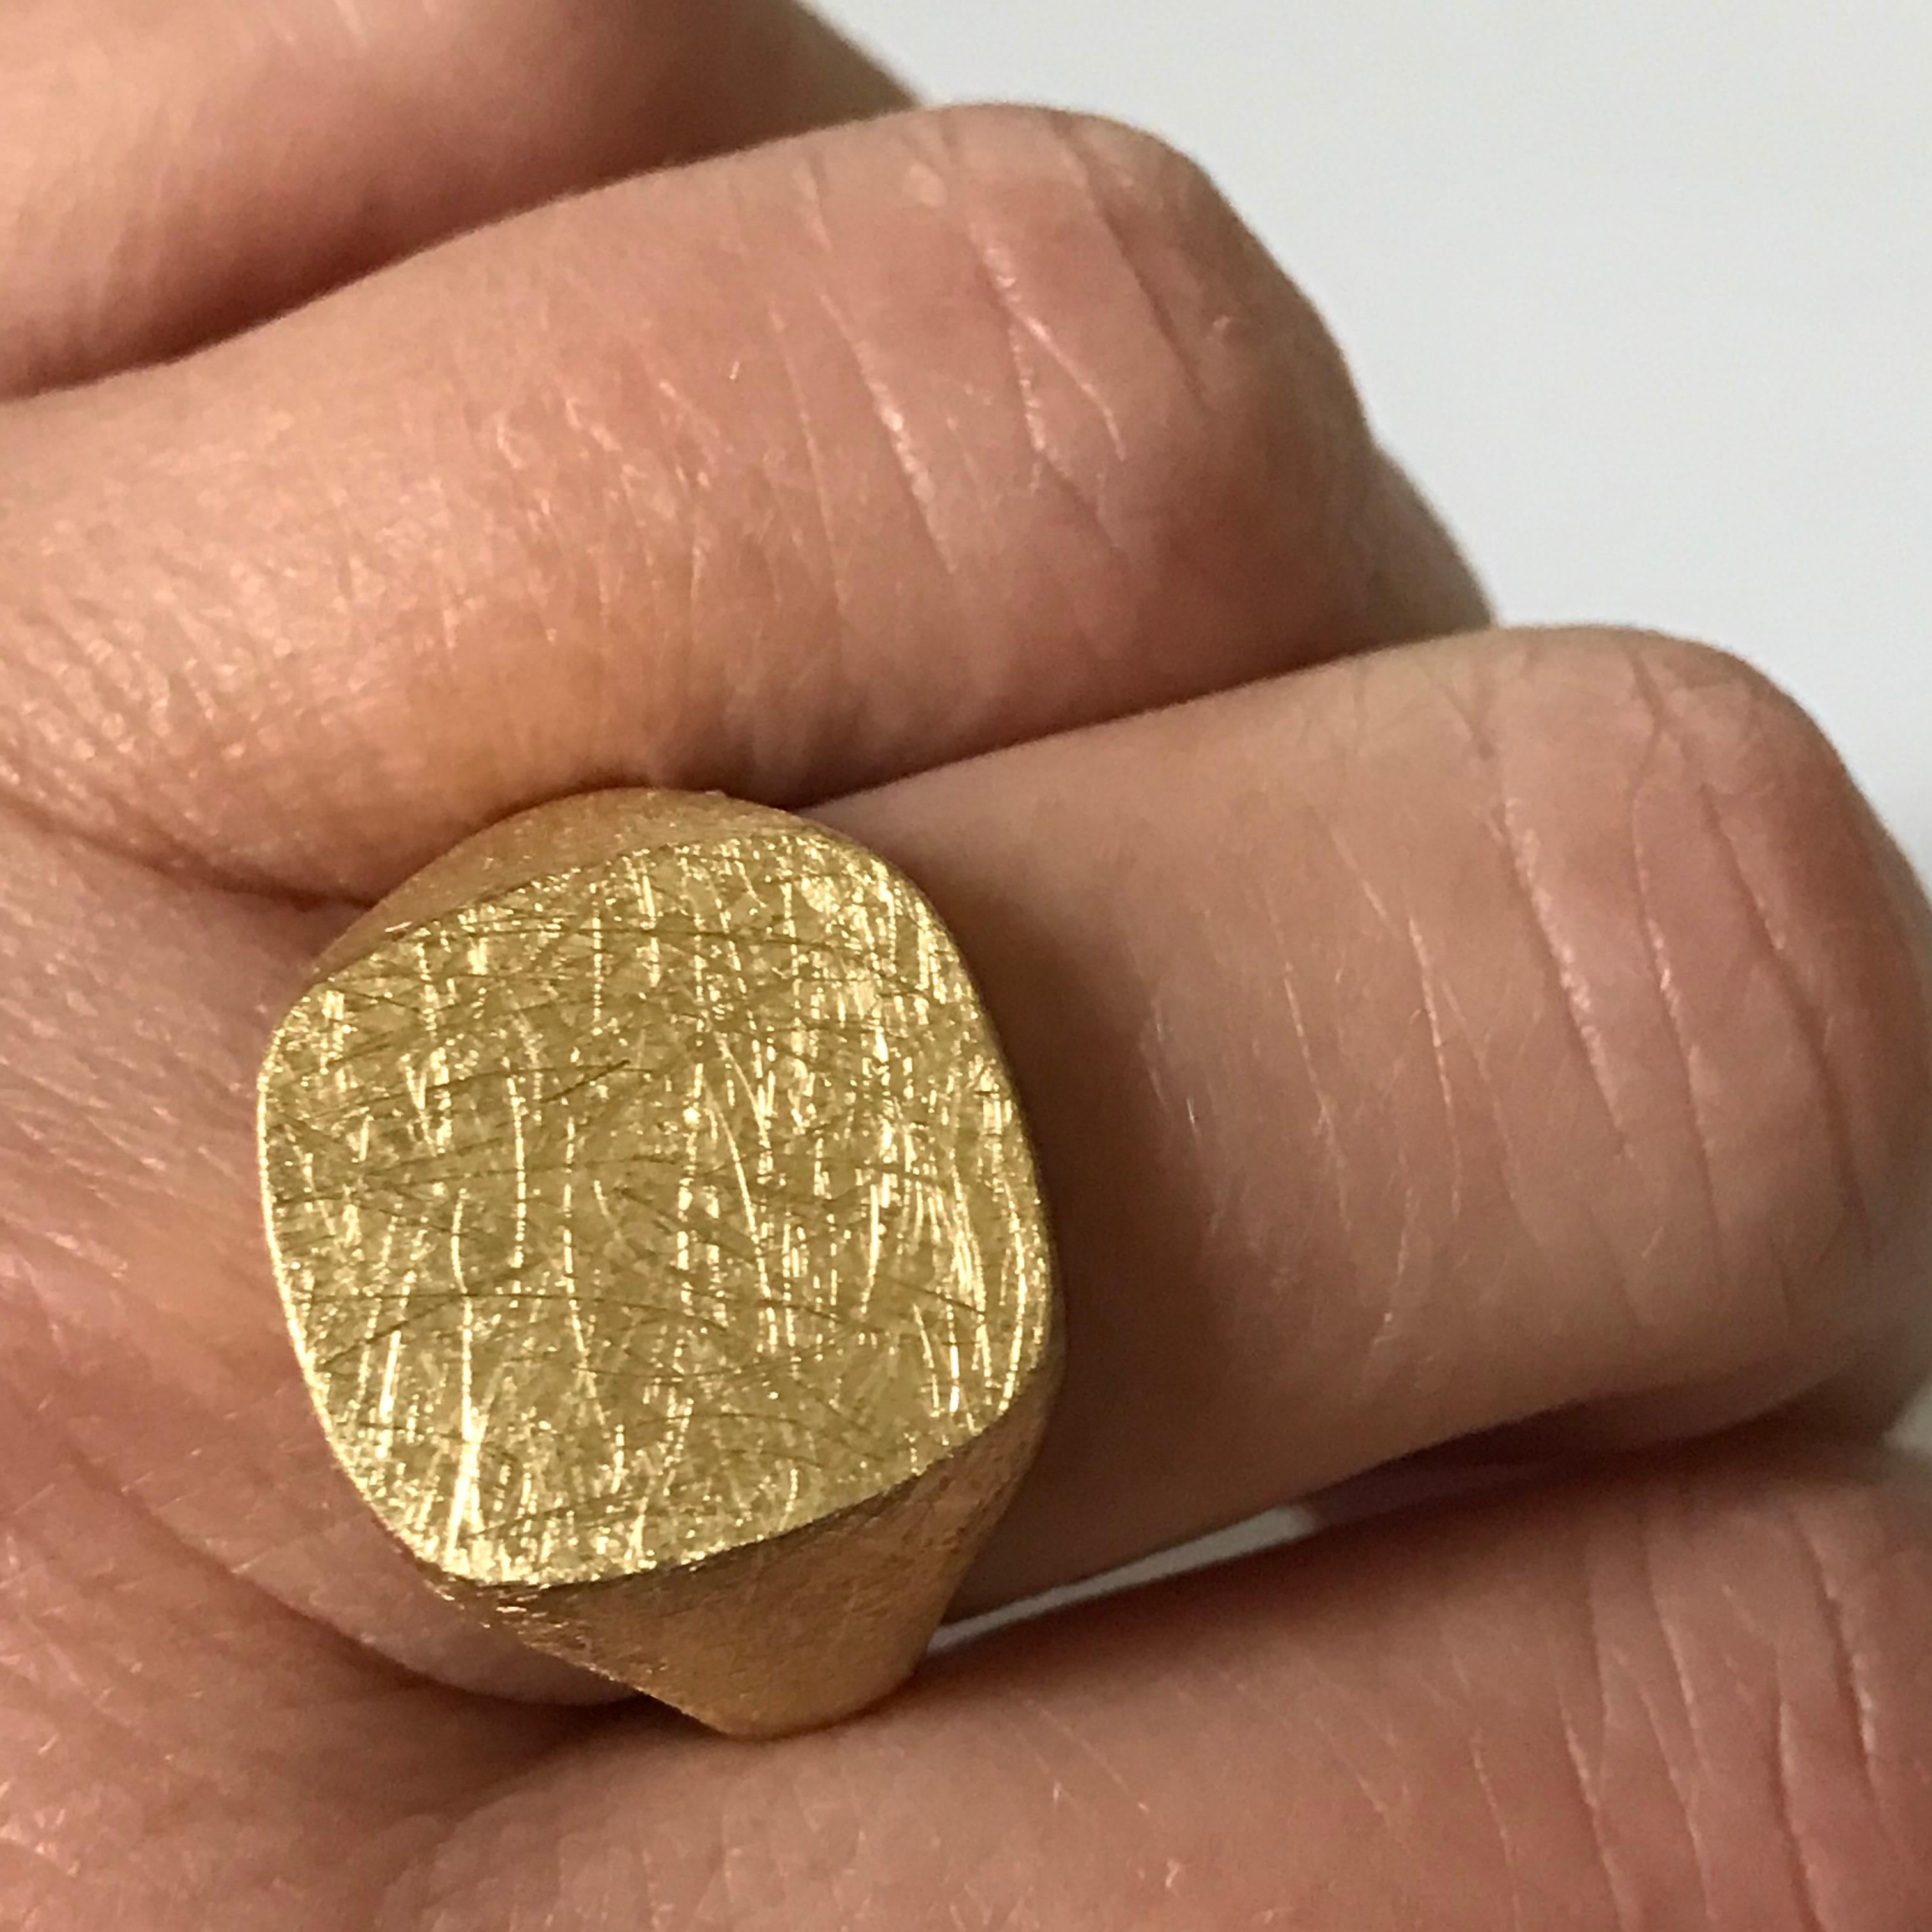 Dalben design 18k solid yellow gold scratch engraved finishing signet ring . 
Ring size 7 1/4 USA - EU 55 . 
Top dimensions :
height 15,5 mm
width 14,5 mm
This ring requires three week from order to be custom-made size.
The ring has been designed